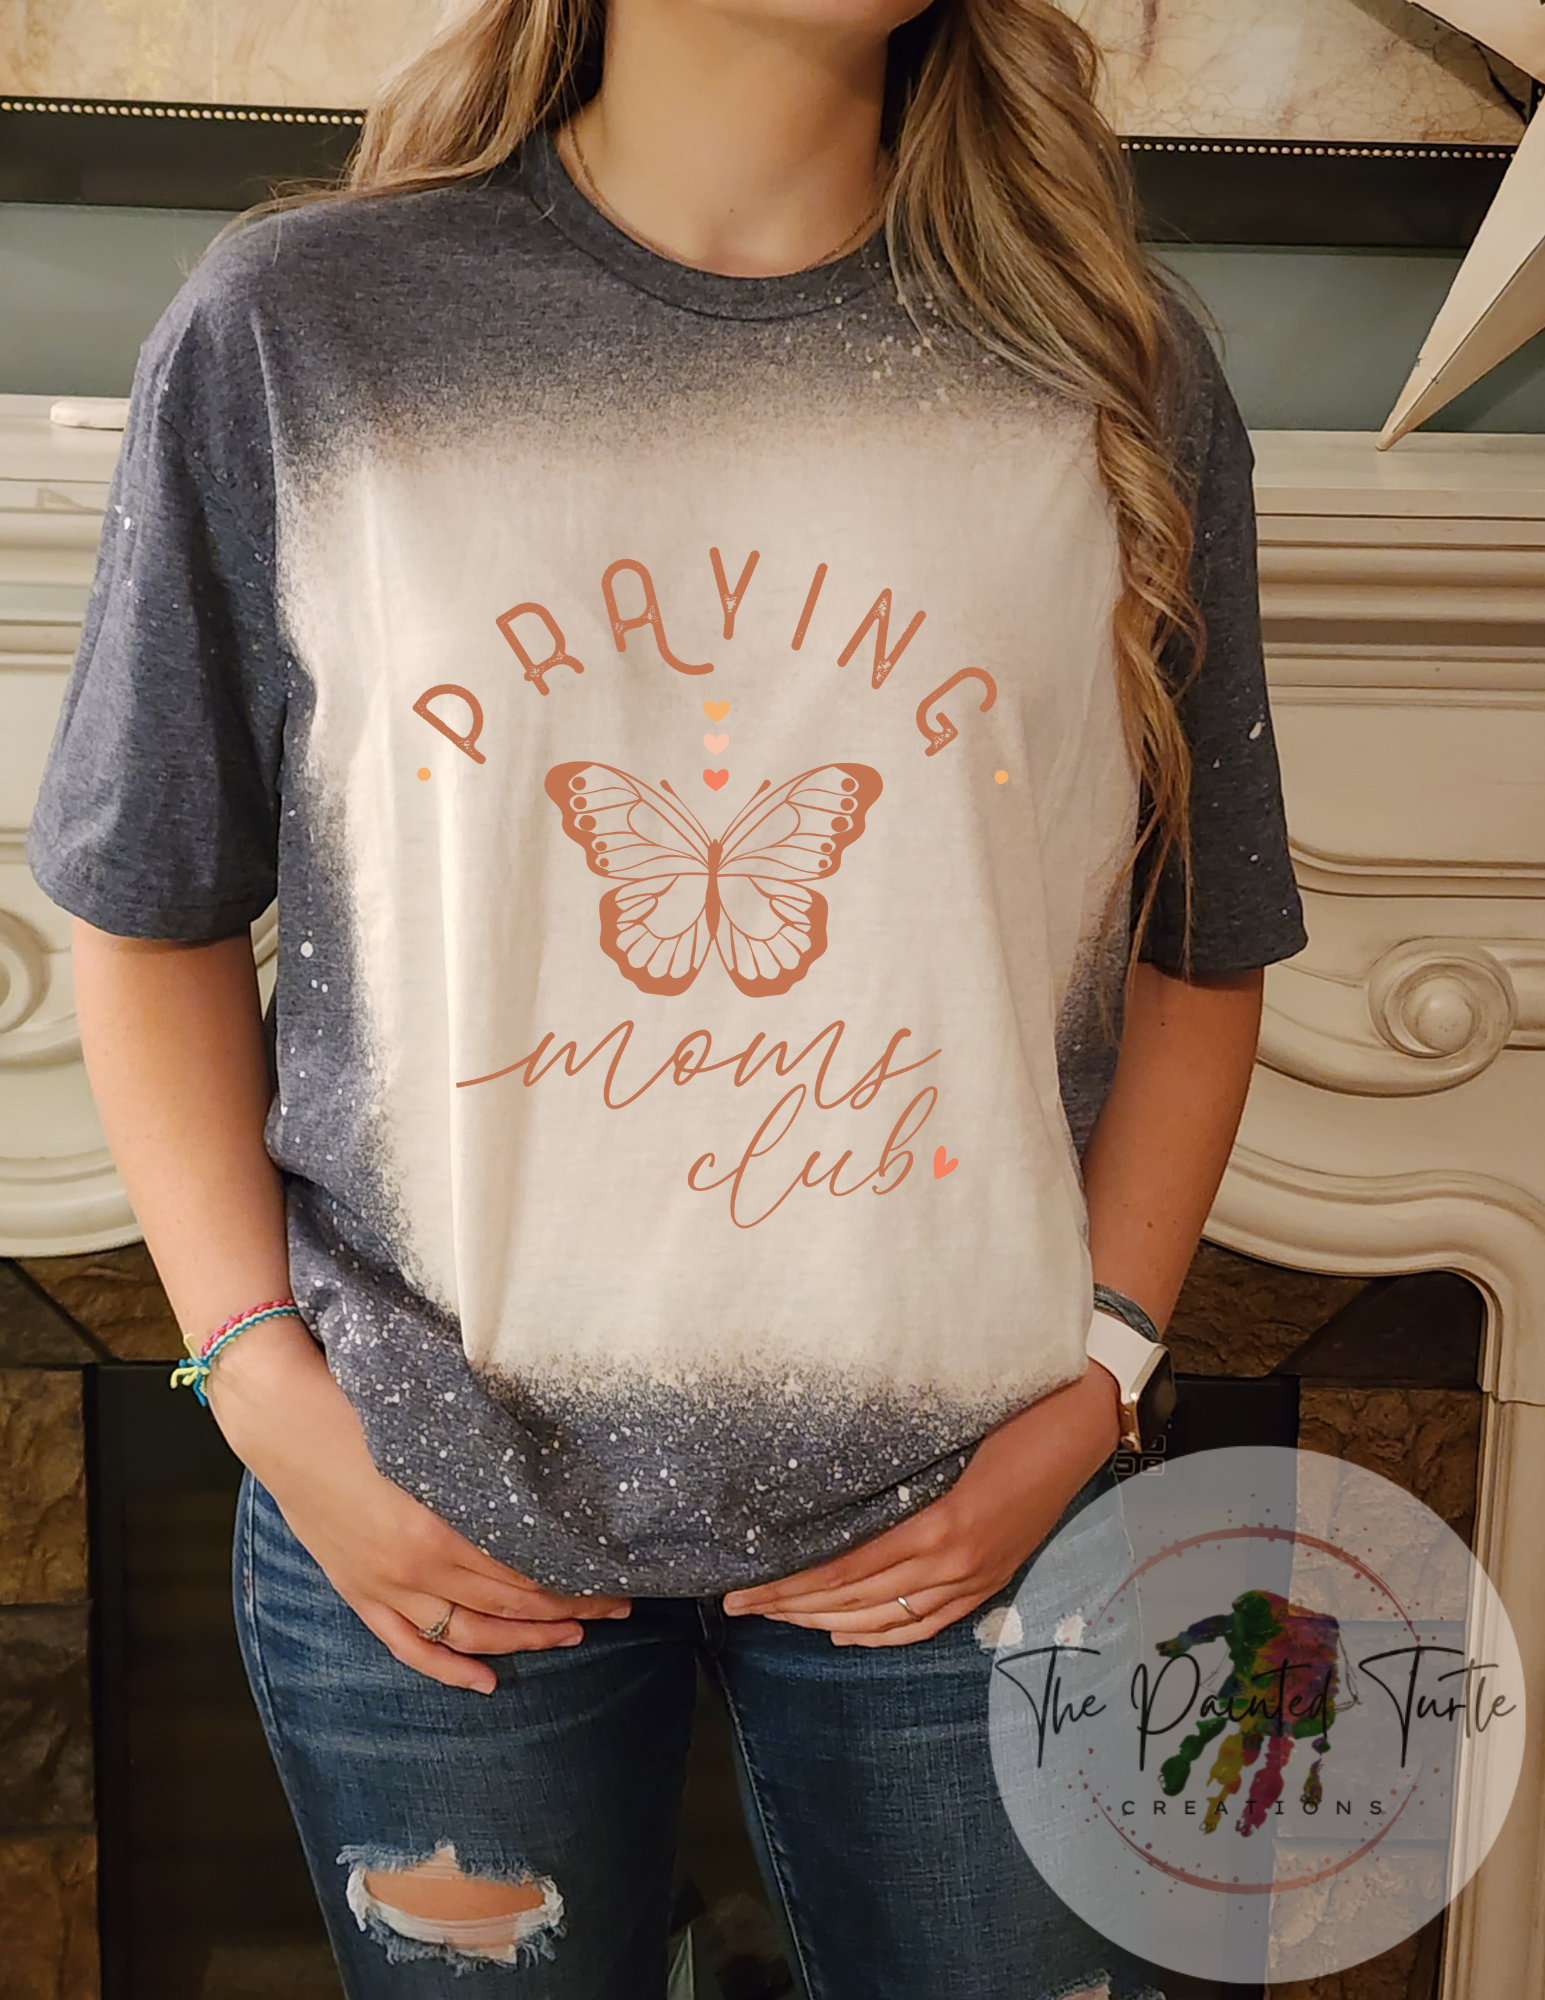 praying moms club butterfly sublimation shirt